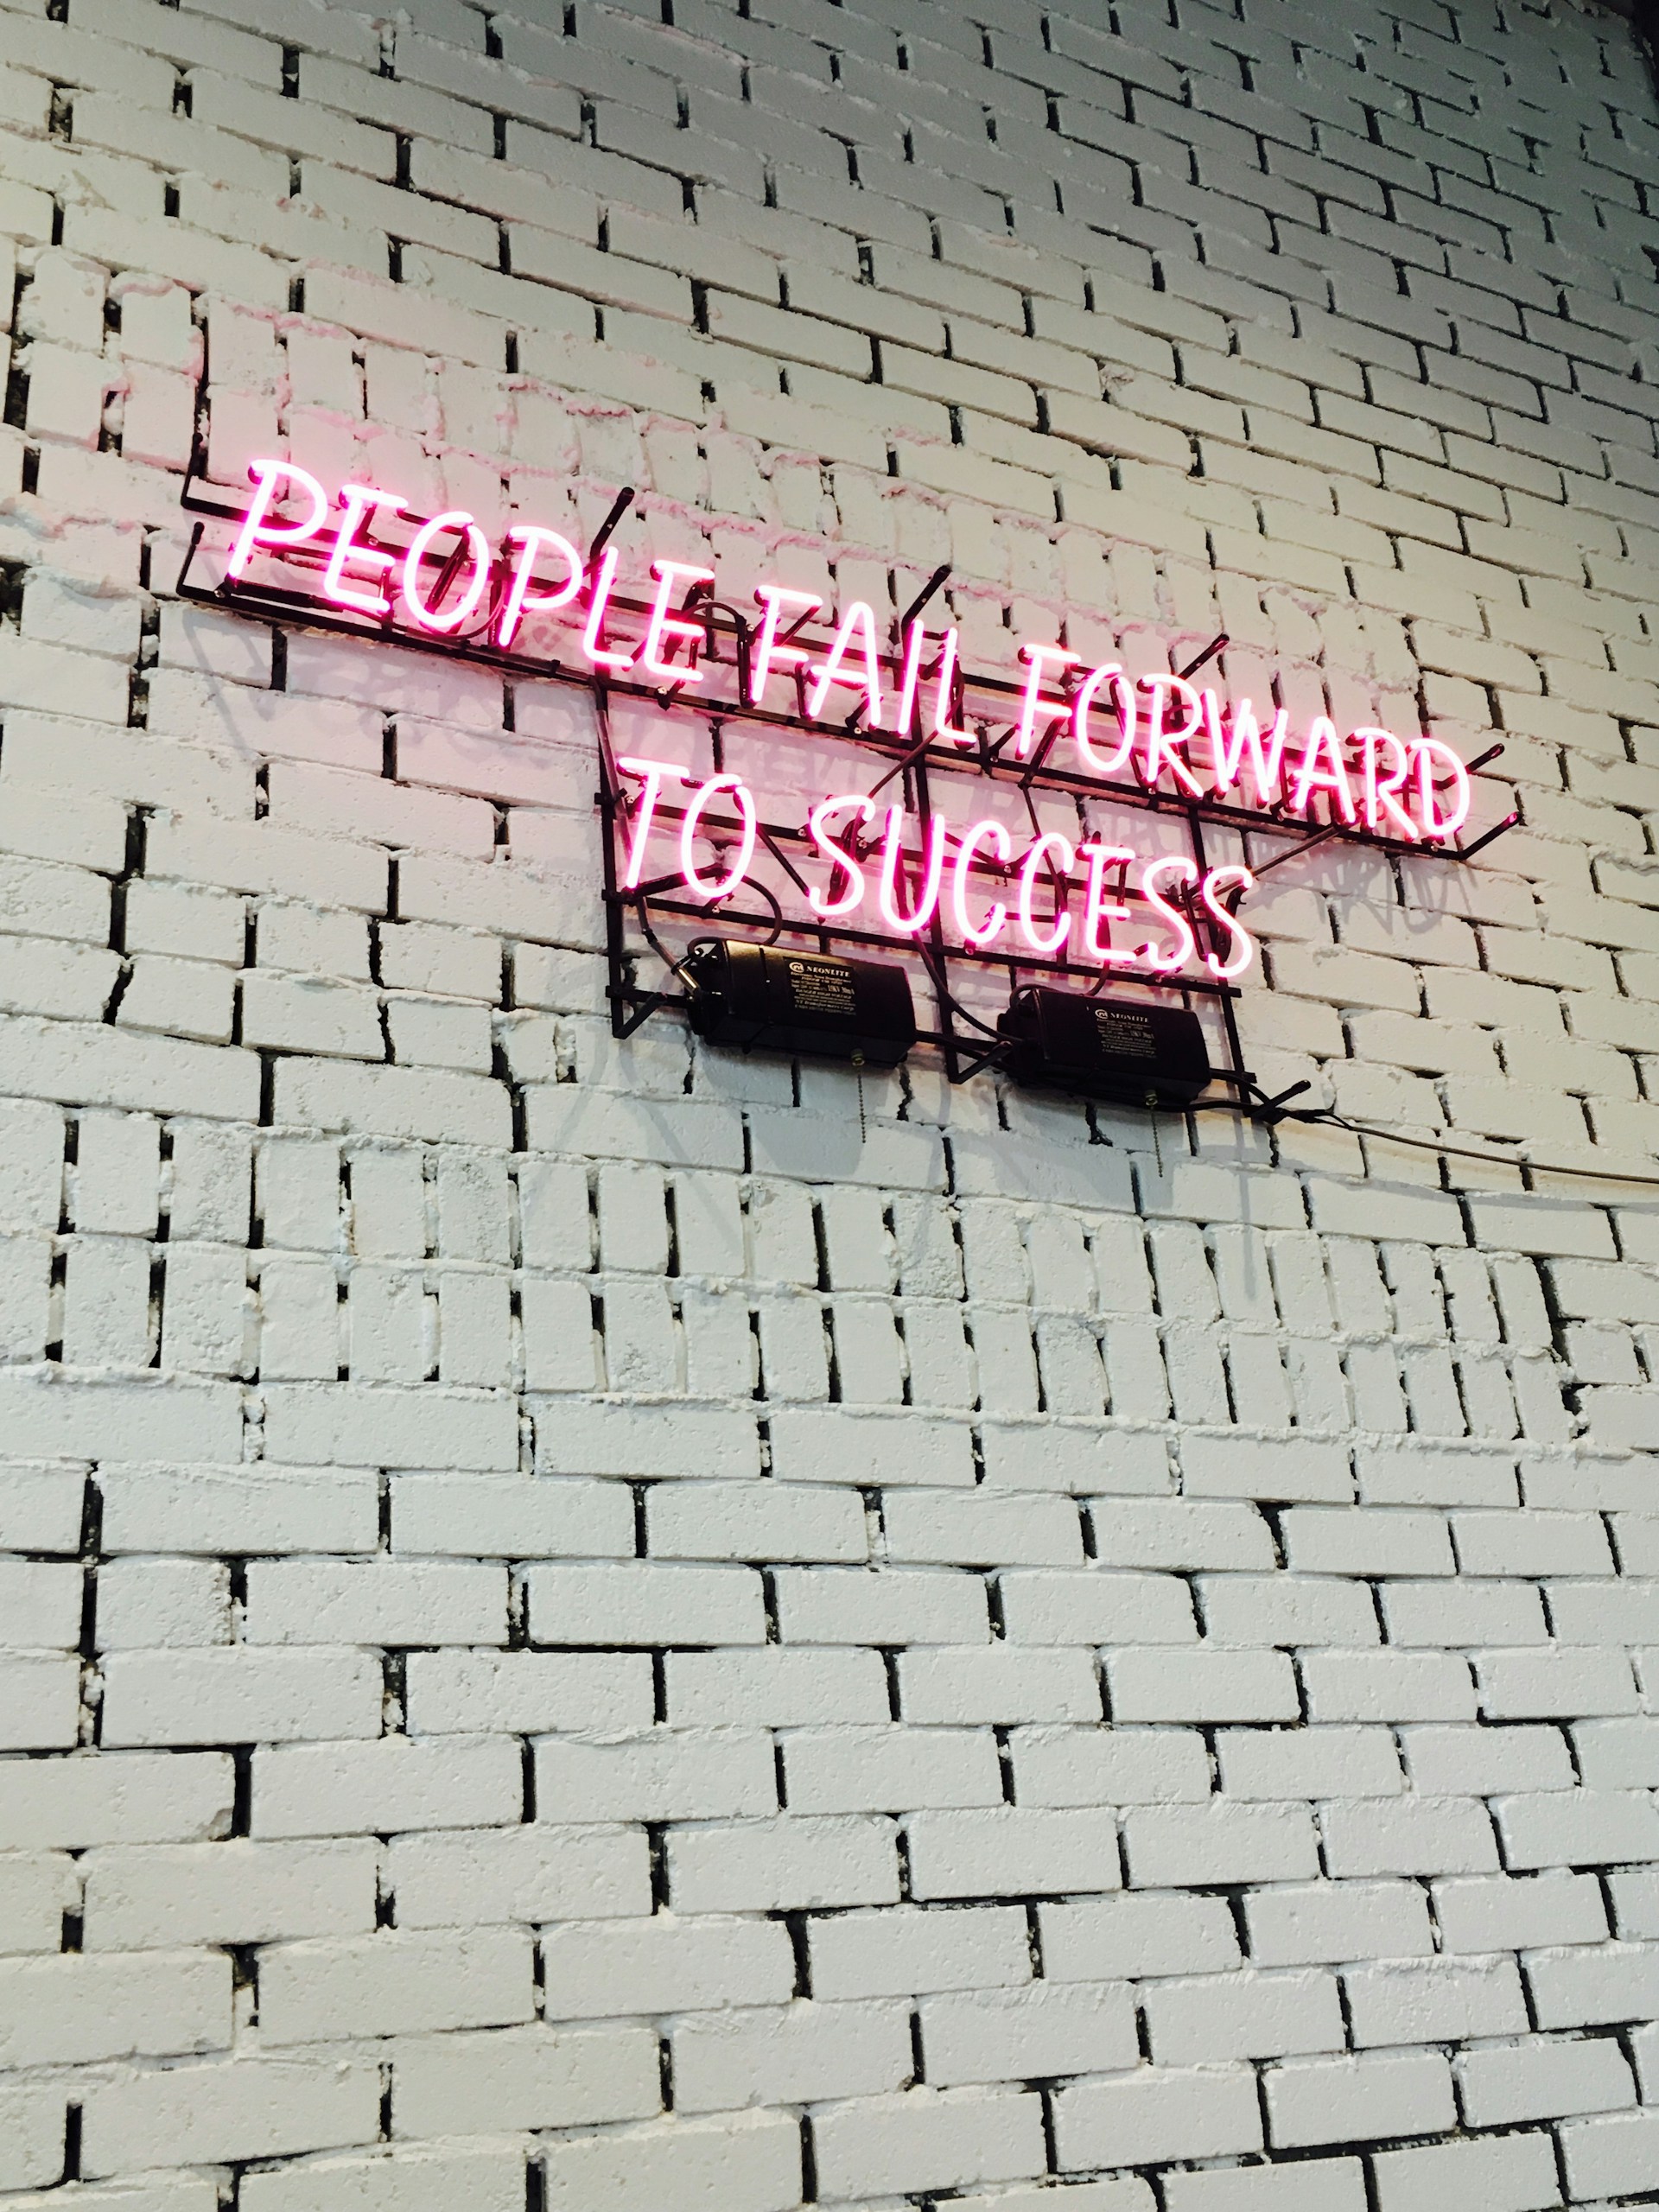 A pink neon sign on a painted brick wall that reads "people fail forward to success."